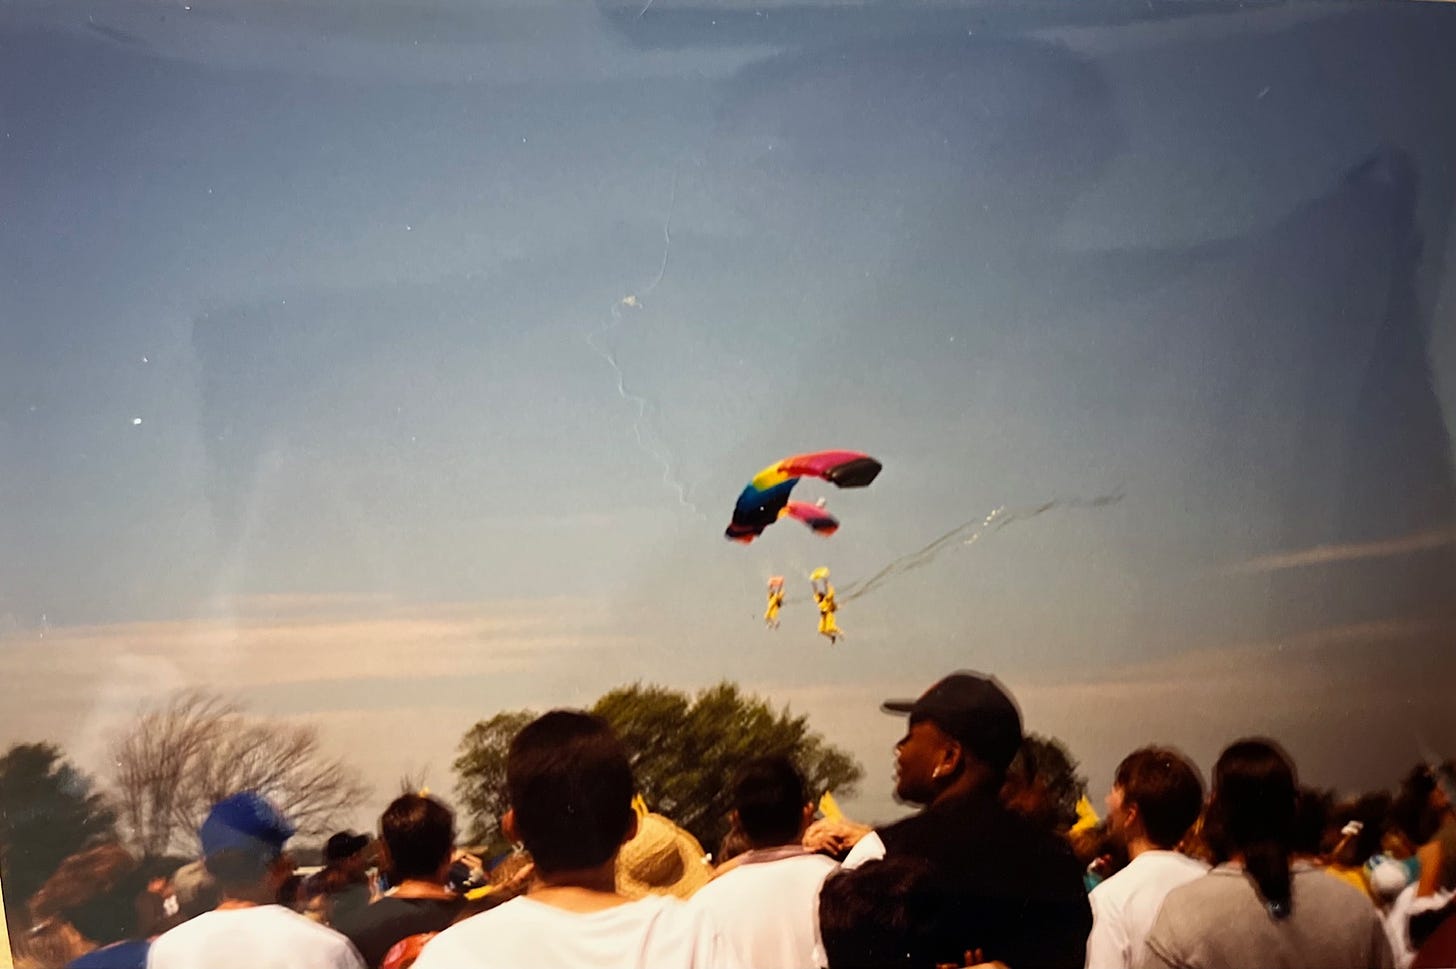 The Greater Kansas City Skydiving Club descended to the ground, putting on a show for the many attendees below (Photo credit: Alyssa Buecker)